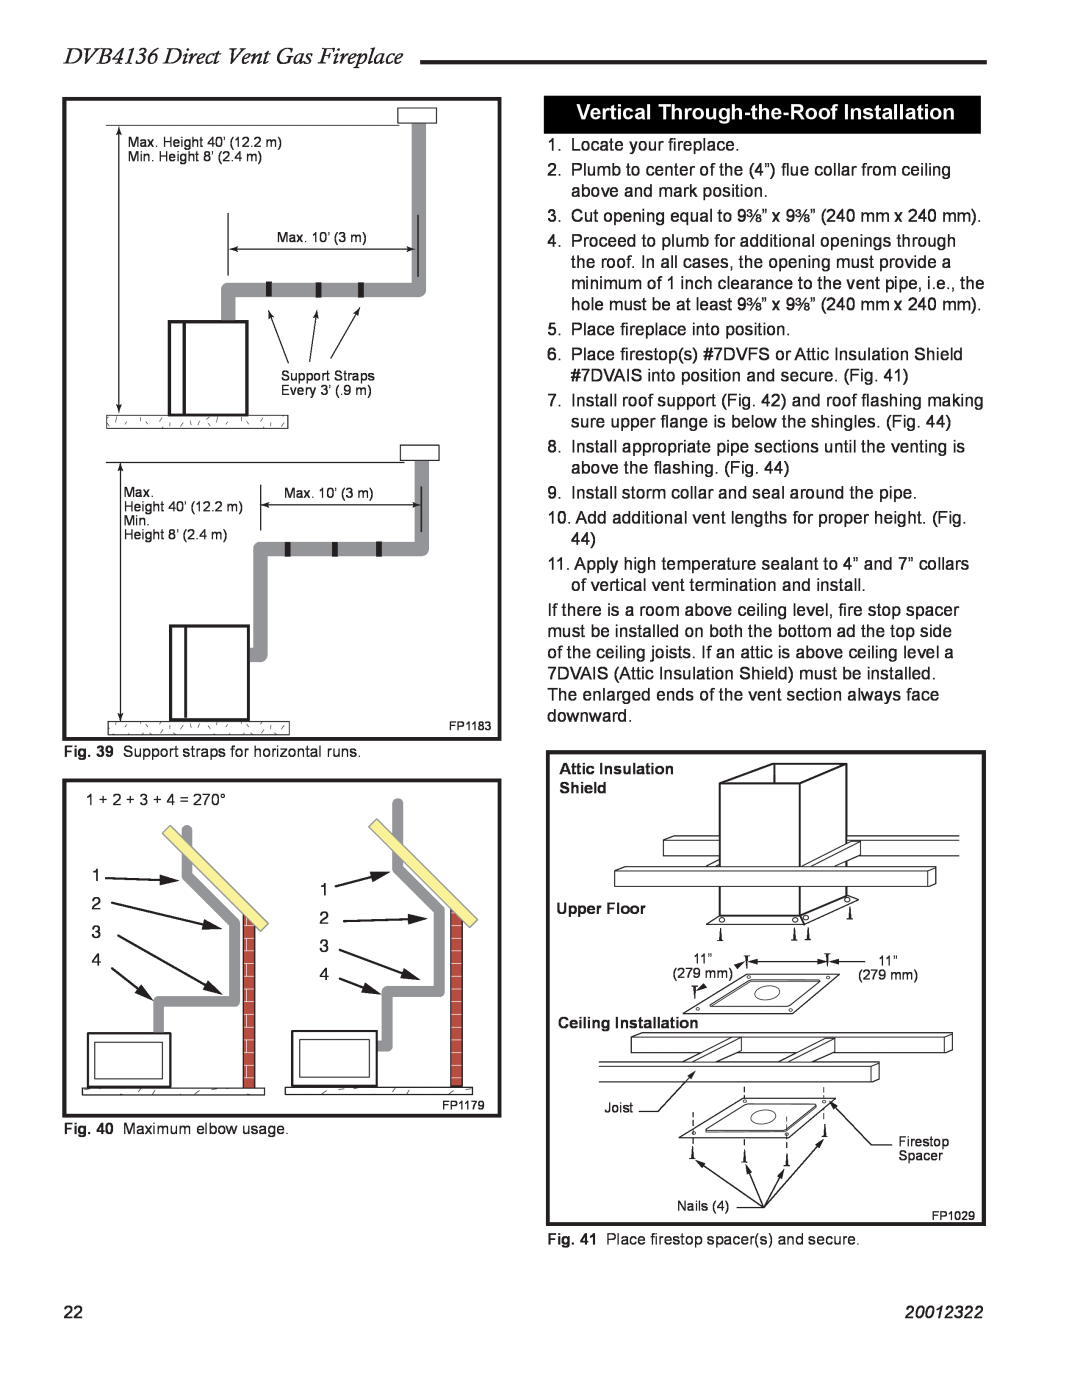 Majestic Appliances manual Vertical Through-the-RoofInstallation, DVB4136 Direct Vent Gas Fireplace, 20012322 